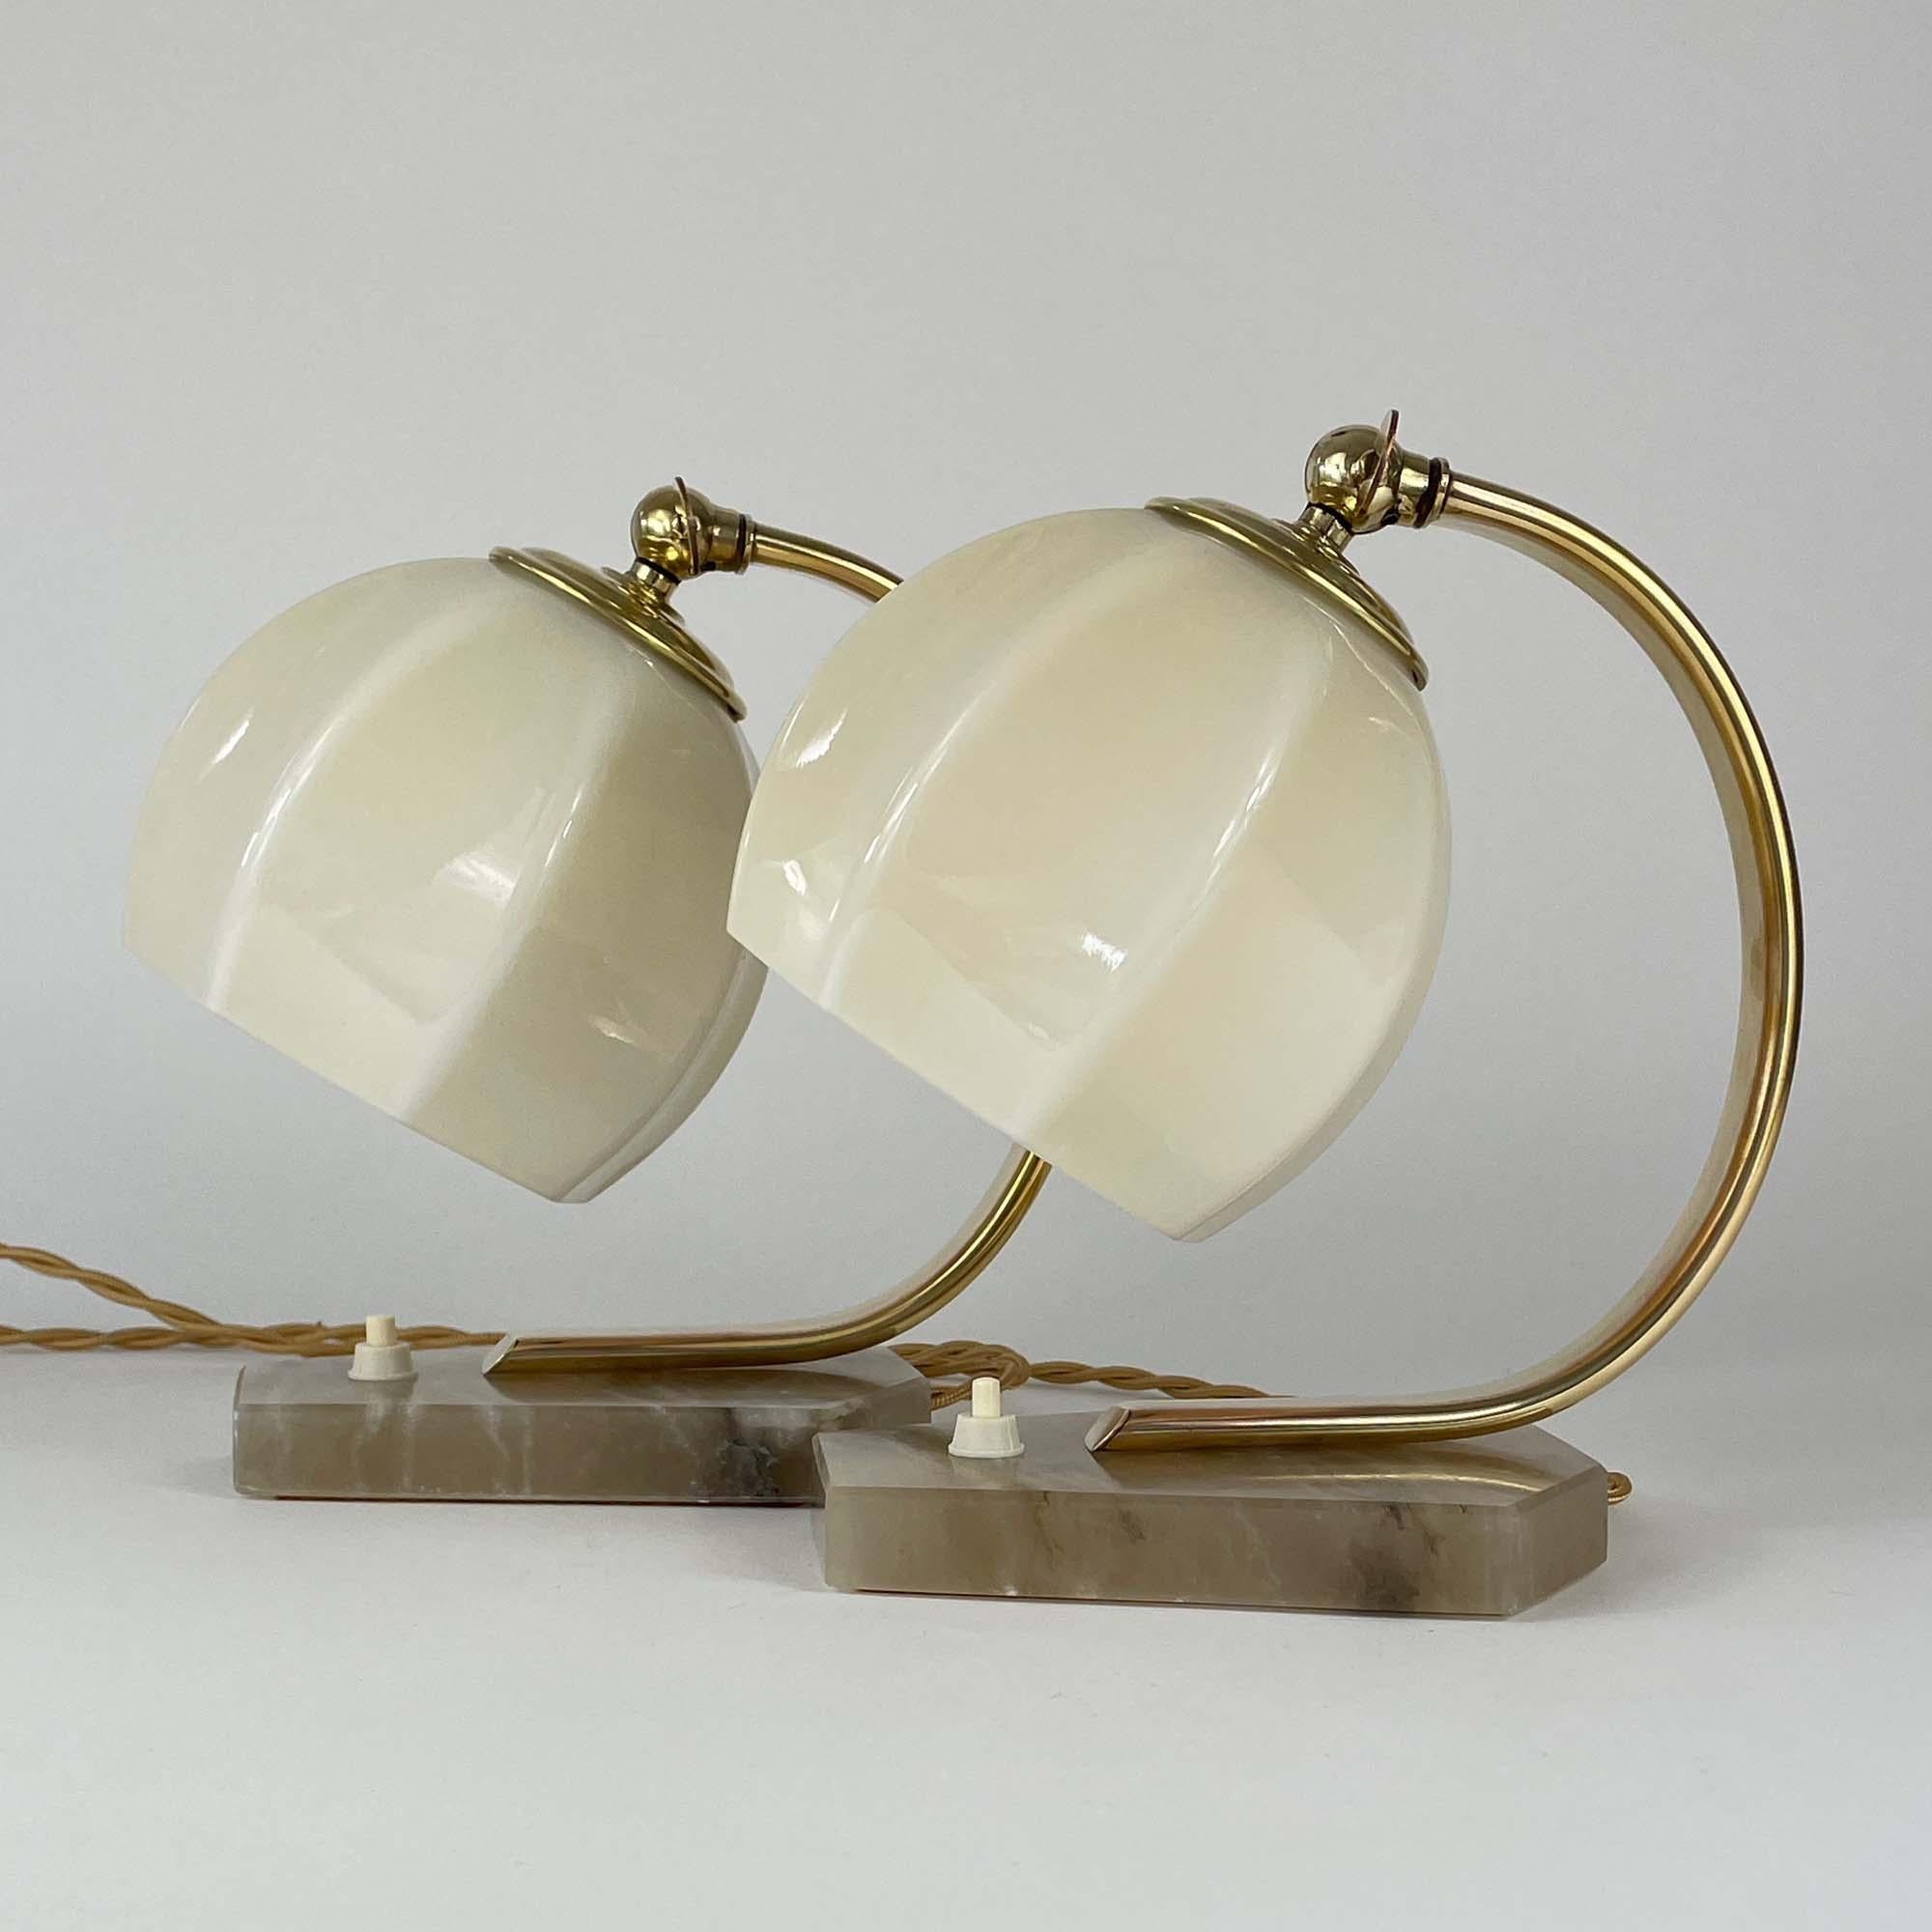 These unusual table or bedside lamps were designed and manufactured in Germany in the 1930s during the Art Deco / Bauhaus period. They feature dark cream colored alabaster bases, brass lamp arms and cream colored opaline lampshades. The lamps shades